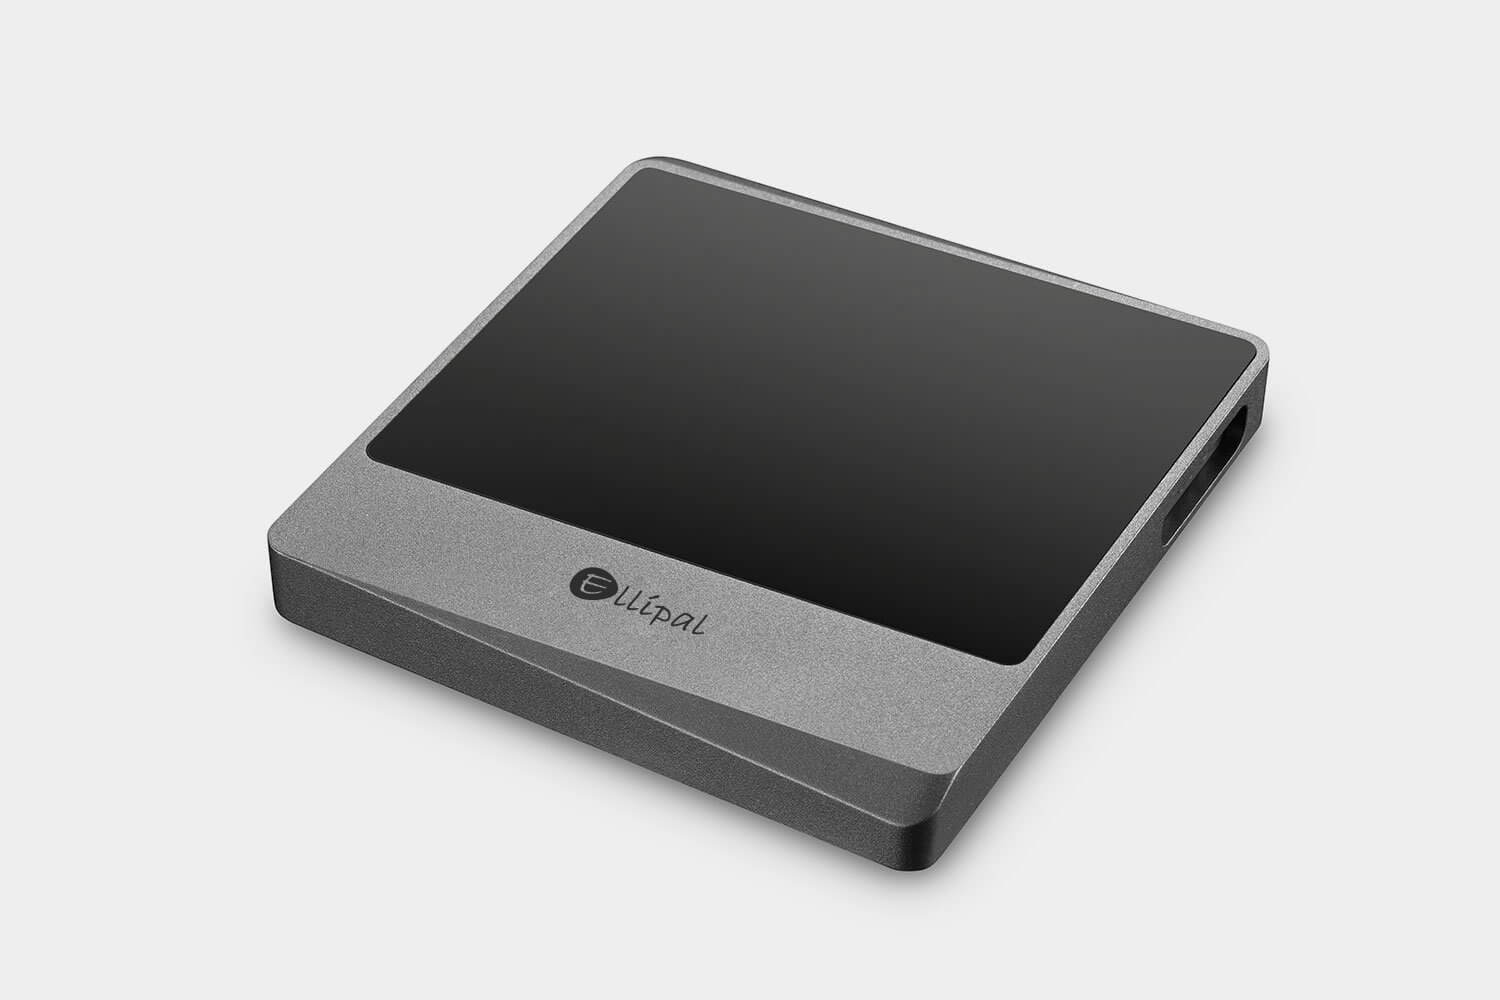 ELLIPAL Titan Mini hardware wallet lying face up on a white desk, with its screen turned off.